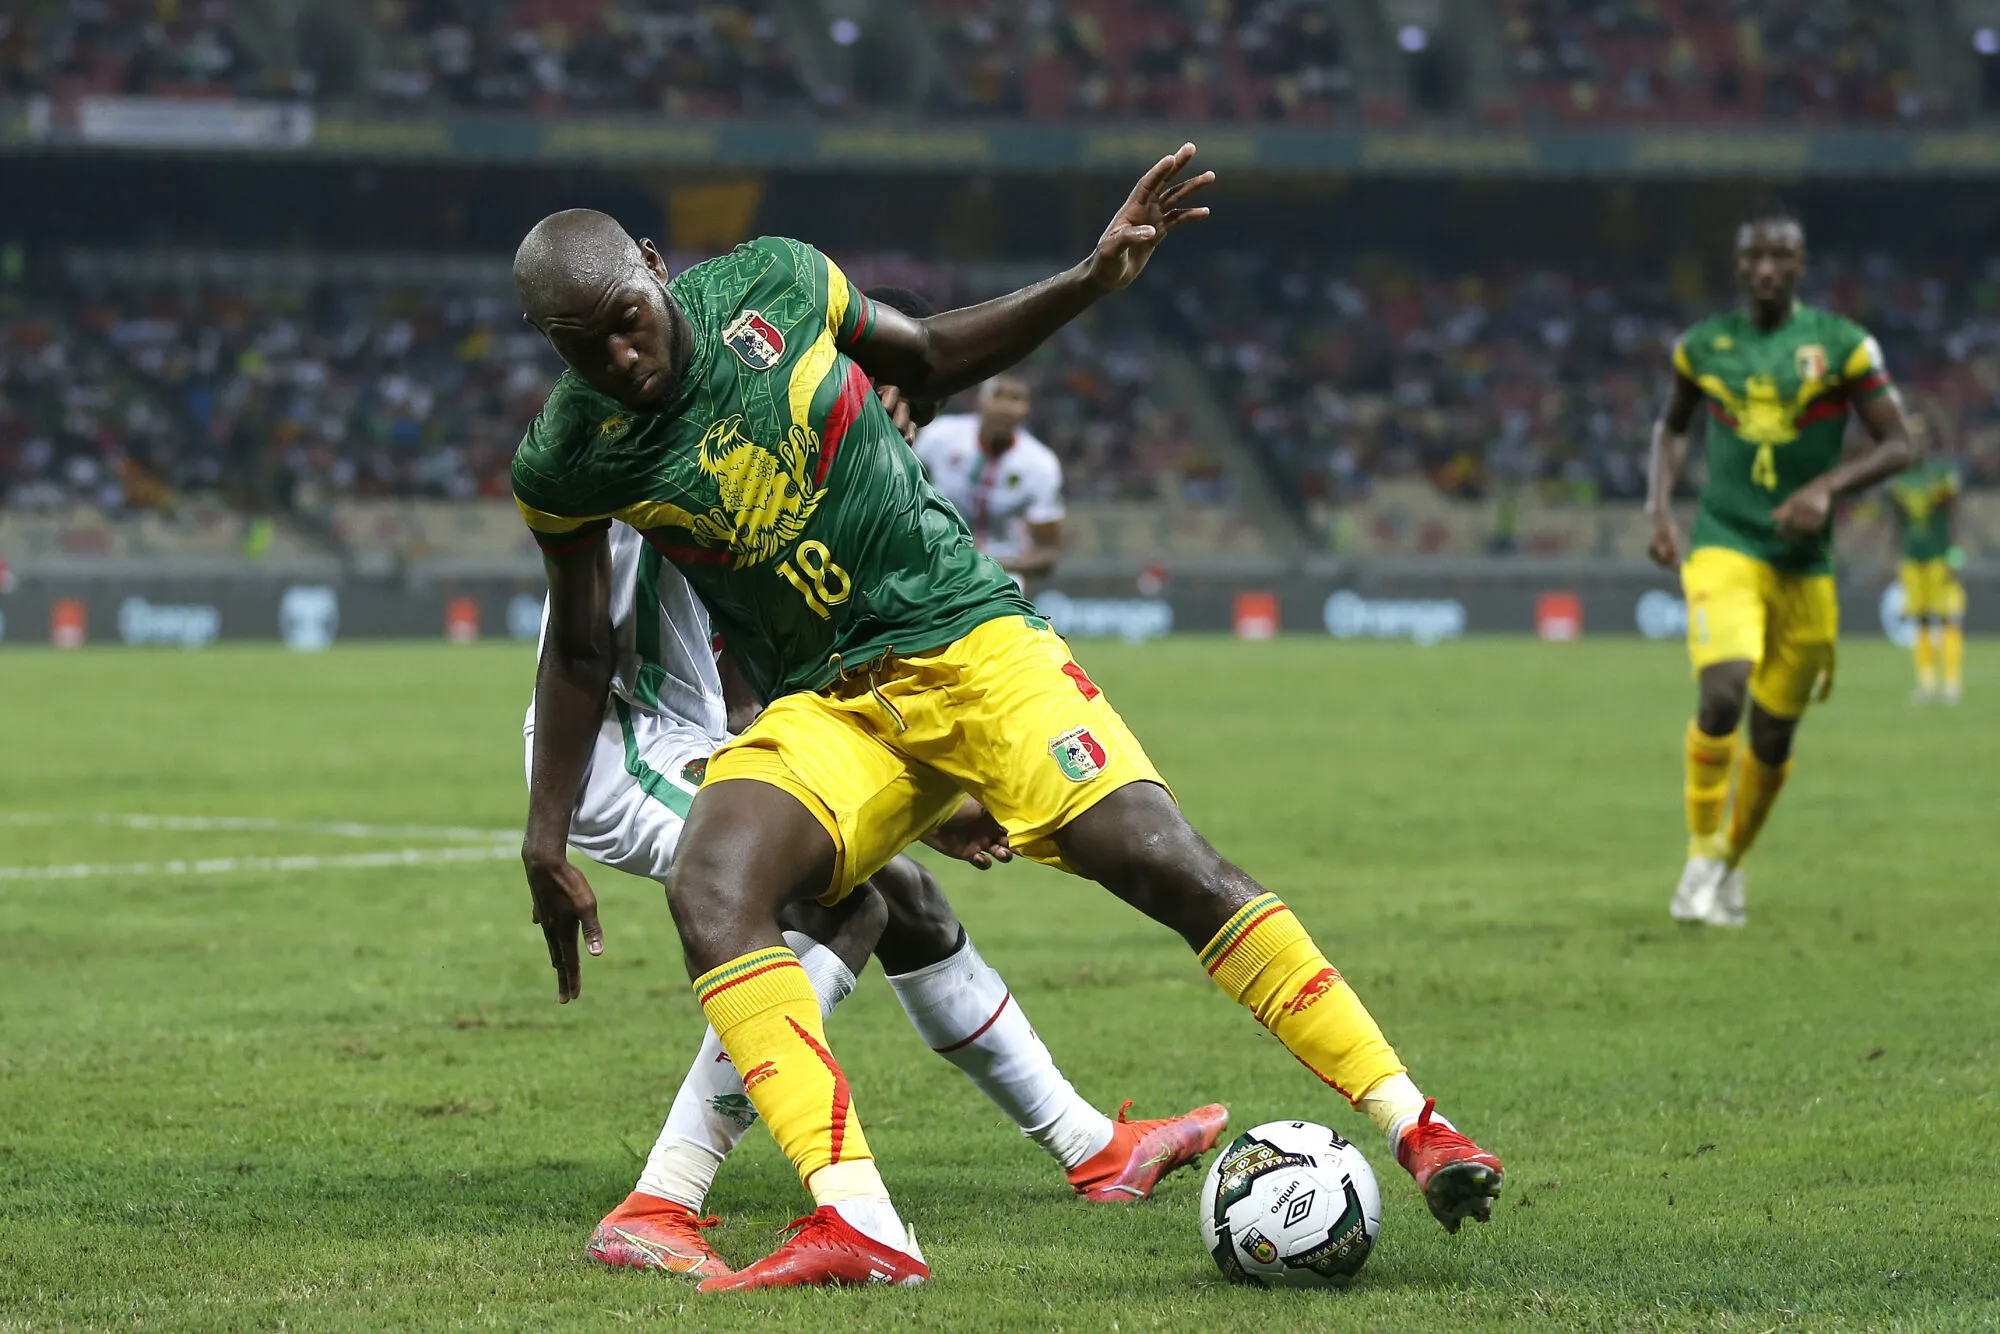 Ibrahima Kone of Mali controls possession during the 2021 Africa Cup of Nations Afcon Finals Mali v Mauritania at Japoma Stadium in Douala, Cameroon on 20 January 2022. ©Alain Guy Suffo/Sports Inc - Photo by Icon sport